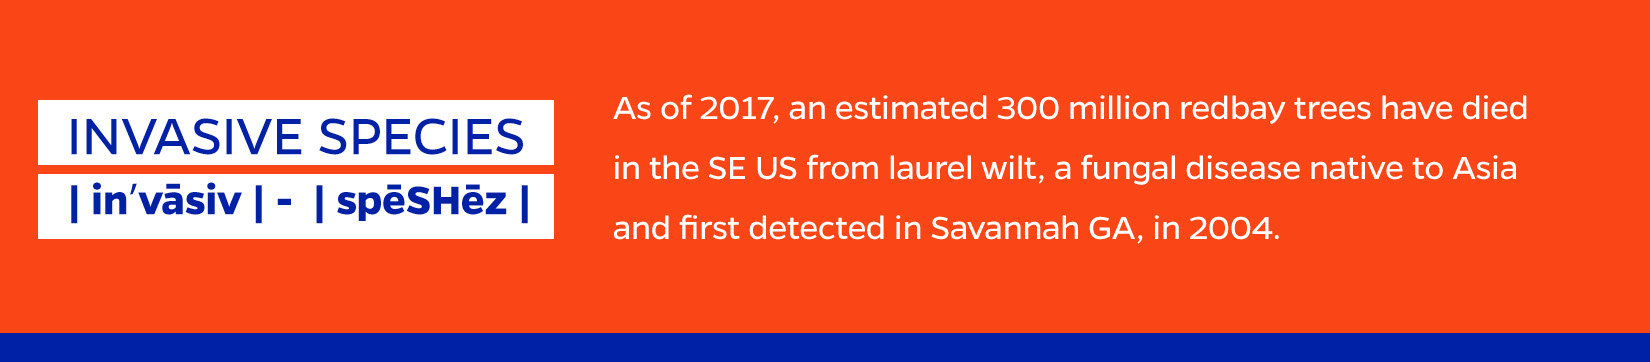 FAST FACT: As of 2017, an estimated 300 million redbay trees have died in the SE US from laurel wilt, a fungal disease native to Asia and first detected in Savannah GA, in 2004